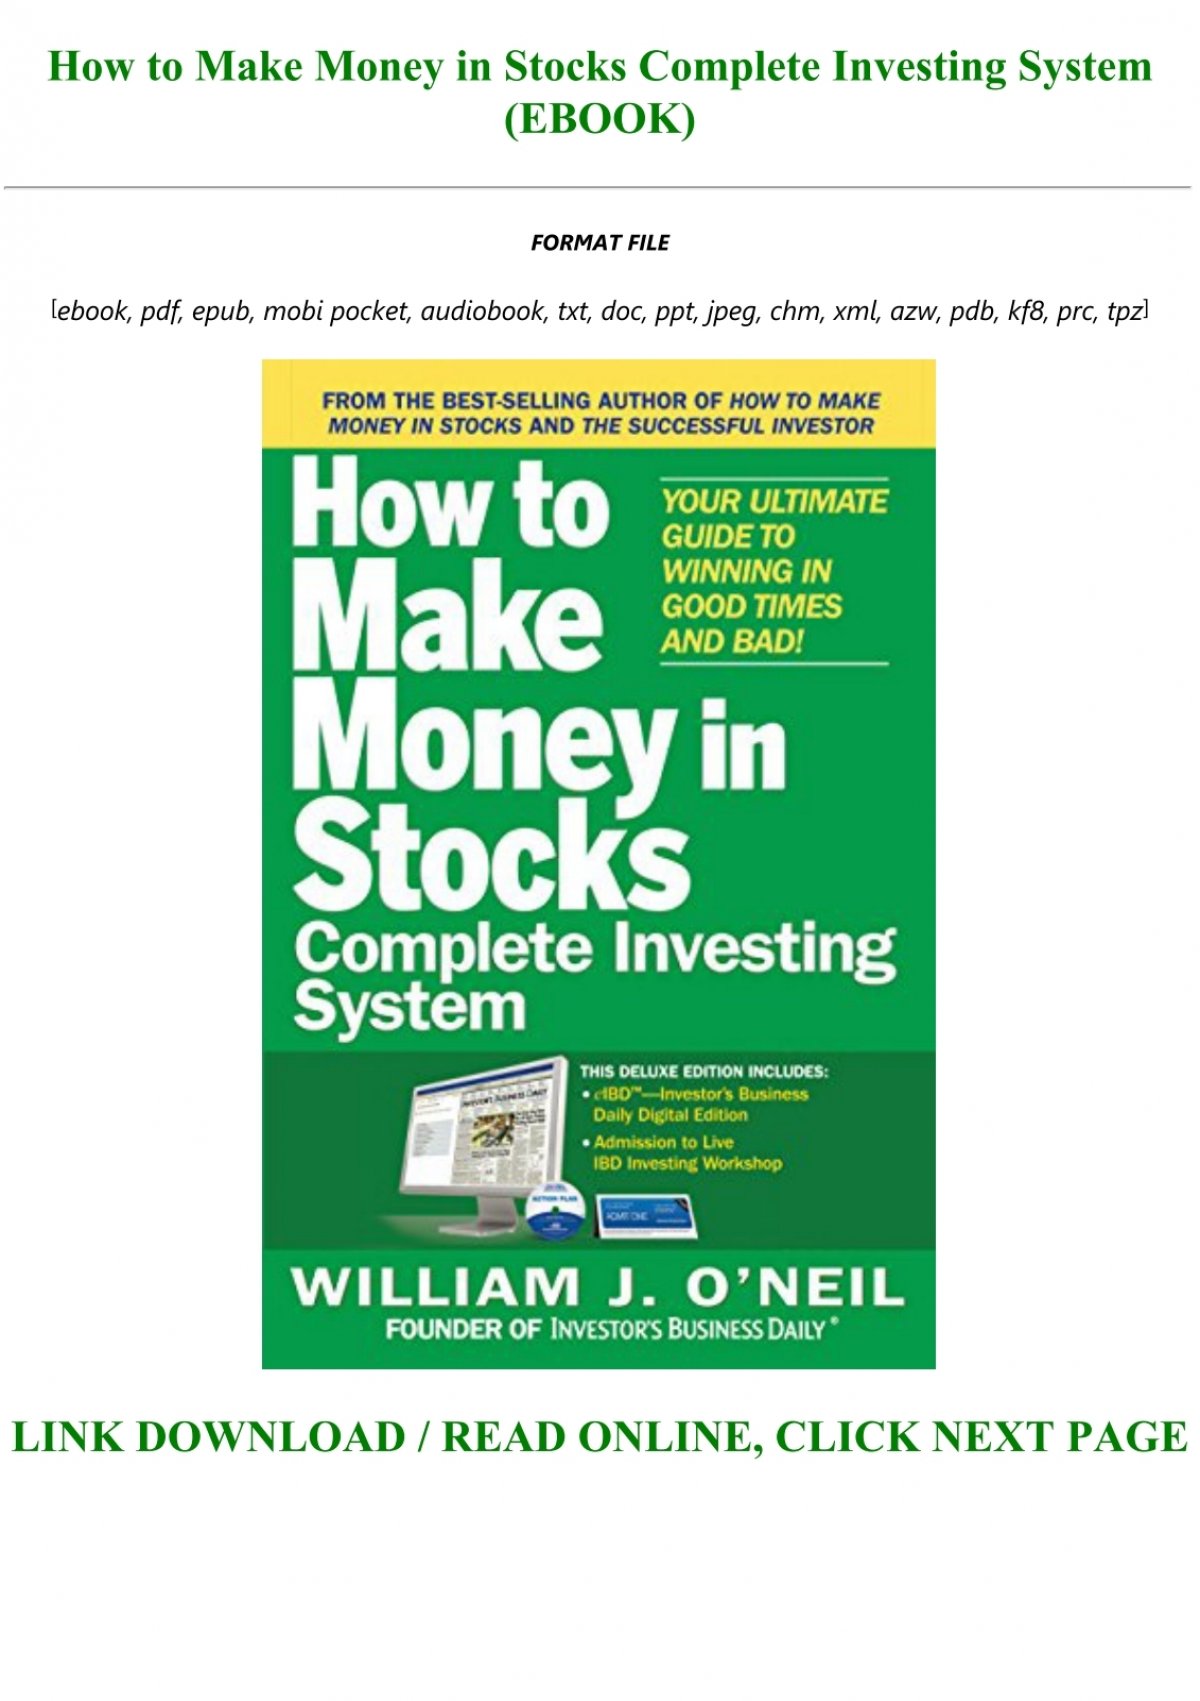 investing 100 dollars in stocks with ally self directed training - Money|Stocks|Stock|System|Book|Market|Trading|Books|Guide|Times|Day|Der|Download|Investors|Edition|Investor|Description|Pdf|Format|Epub|O'neil|Die|Strategies|Strategy|Mit|Investing|Dummies|Risk|Gains|Business|Man|Investment|Years|World|Wie|Action|Charts|William|Dad|Plan|Good Times|Stock Market|Ultimate Guide|Mobi Format|Full Book|Day Trading|National Bestseller|Successful Investing|Rich Dad|Seven-Step Process|Maximizing Gains|Major Study|American Association|Individual Investors|Mutual Funds|Book Description|Download Book Description|Handbuch Des|Stock Market Winners|12-Year Study|Leading Investment Strategies|Top-Performing Strategy|System-You Get|Easy Steps|Daily Resource|Big Winners|Market Rally|Big Losses|Market Downturn|Canslim Method